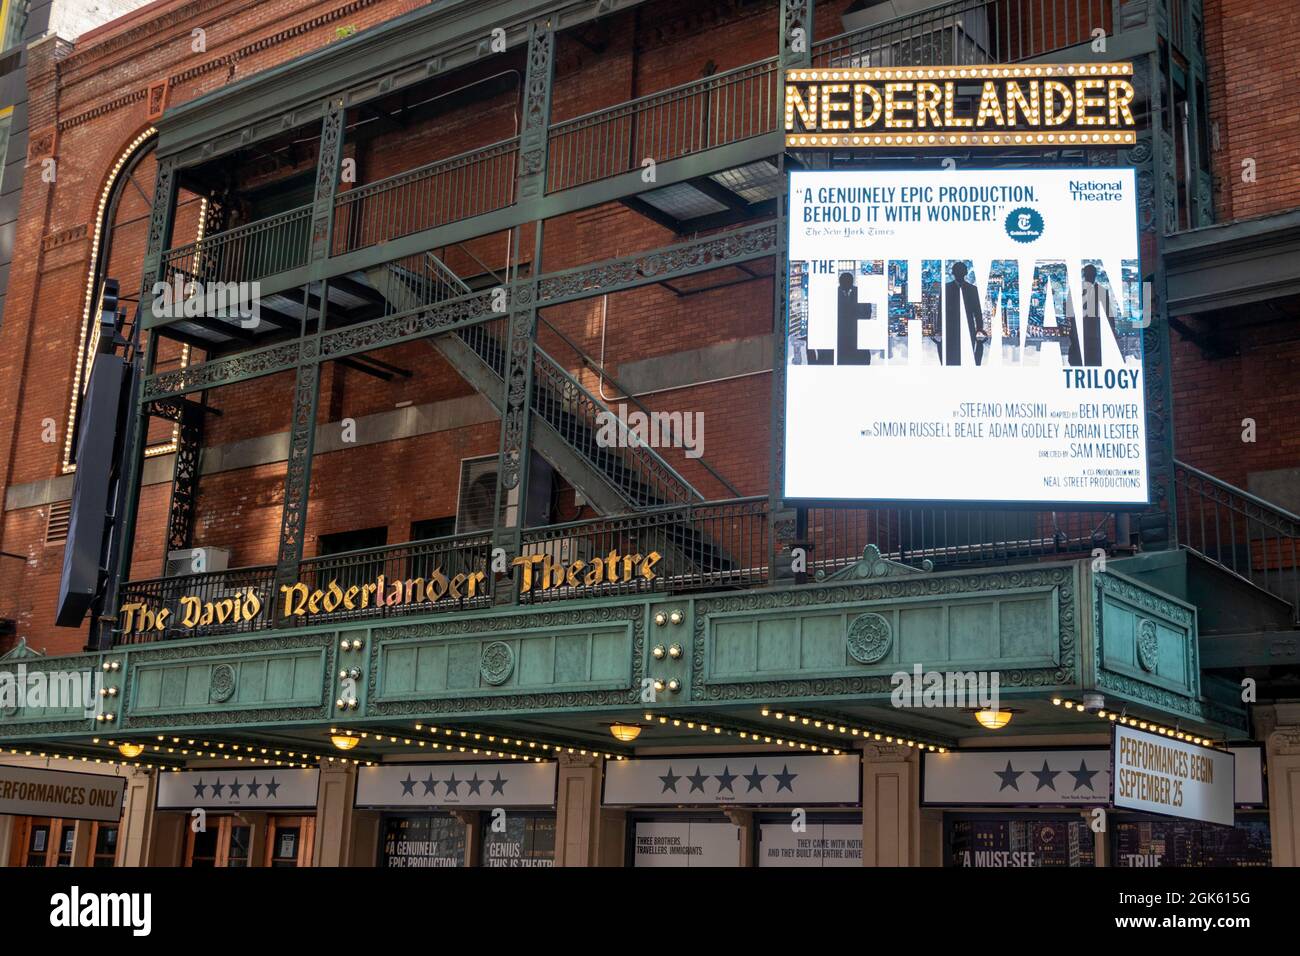 David T. Nederlander Theatre with the 'Lehman Trilogy' Marquee, NYC, USA  2021 Stock Photo